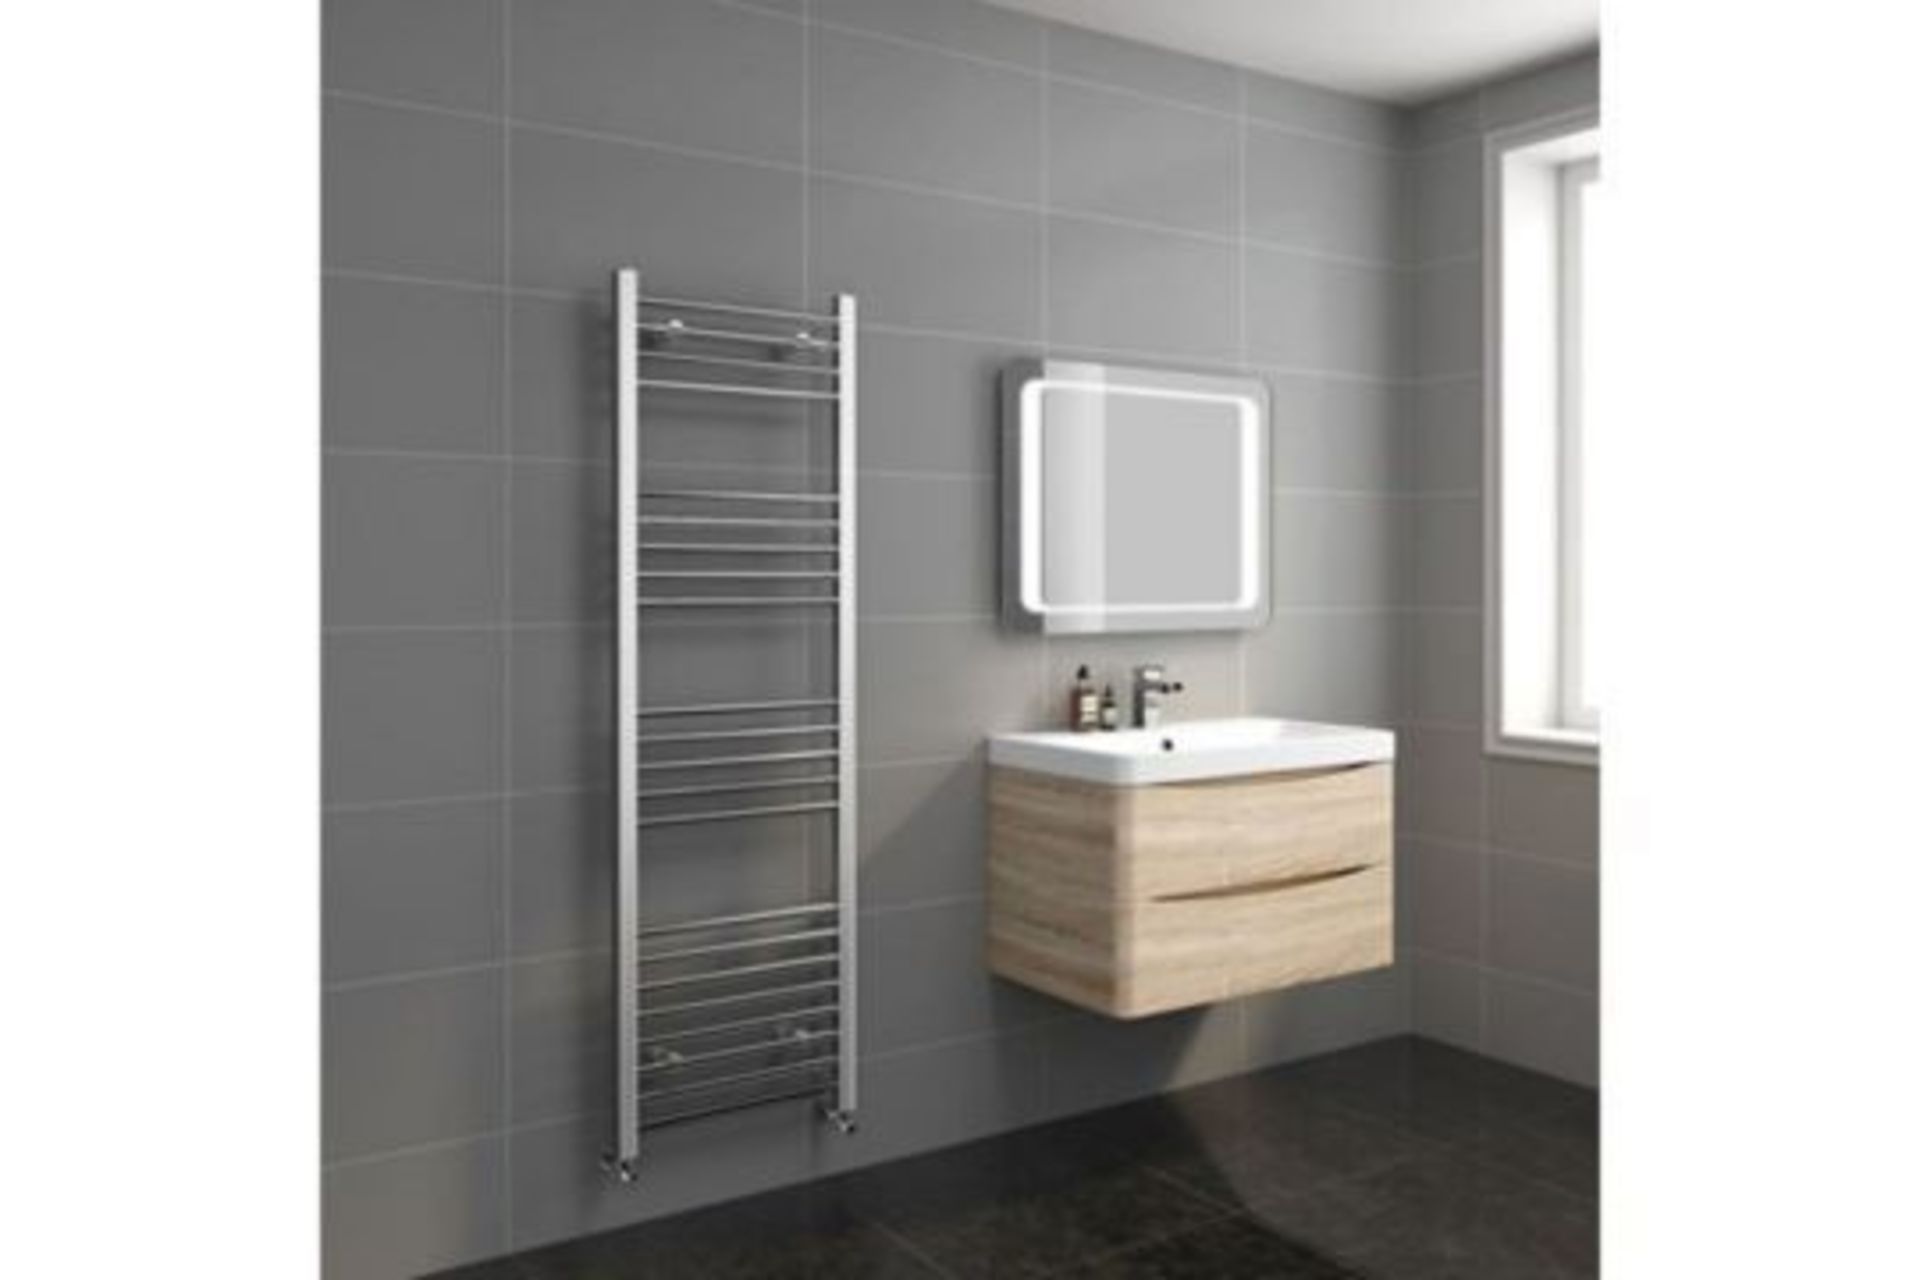 New & Boxed 1600x500 mm - 20 mm Tubes - Chrome Heated Straight Rail Ladder Towel Radiator. Ns1 New - Image 2 of 2